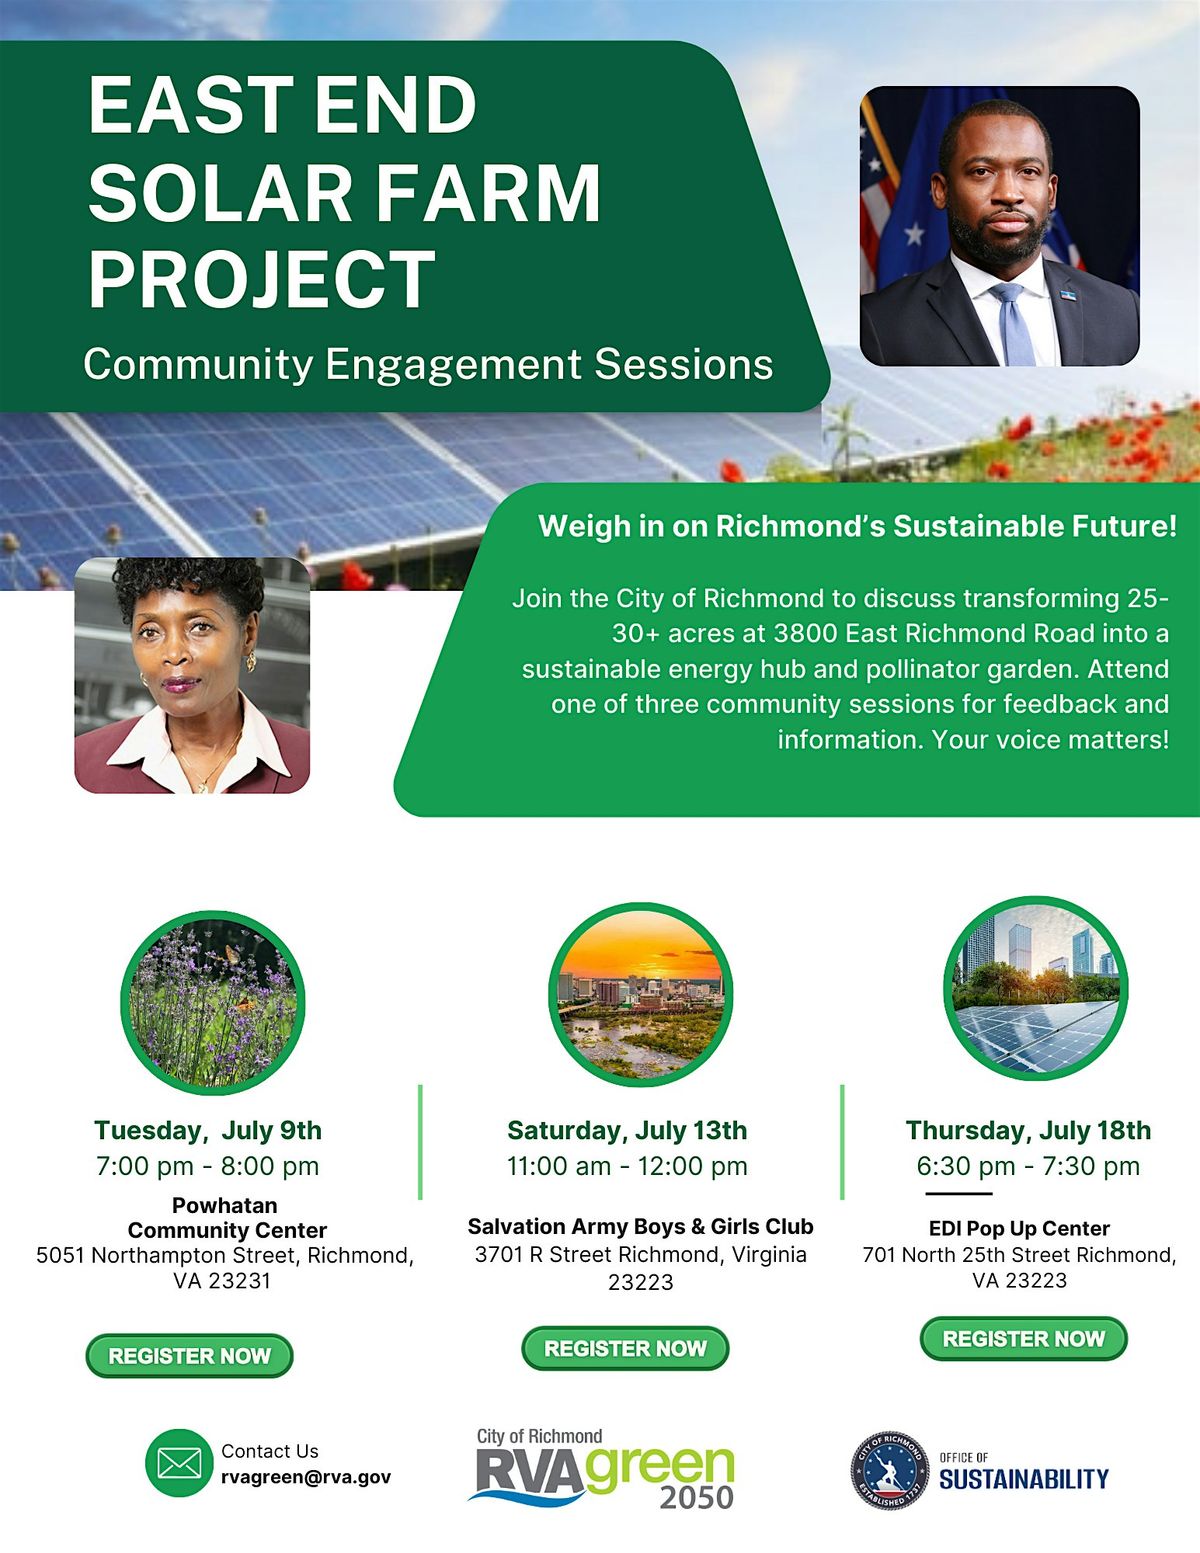 East End Solar Project Community Engagement Session: July 9th